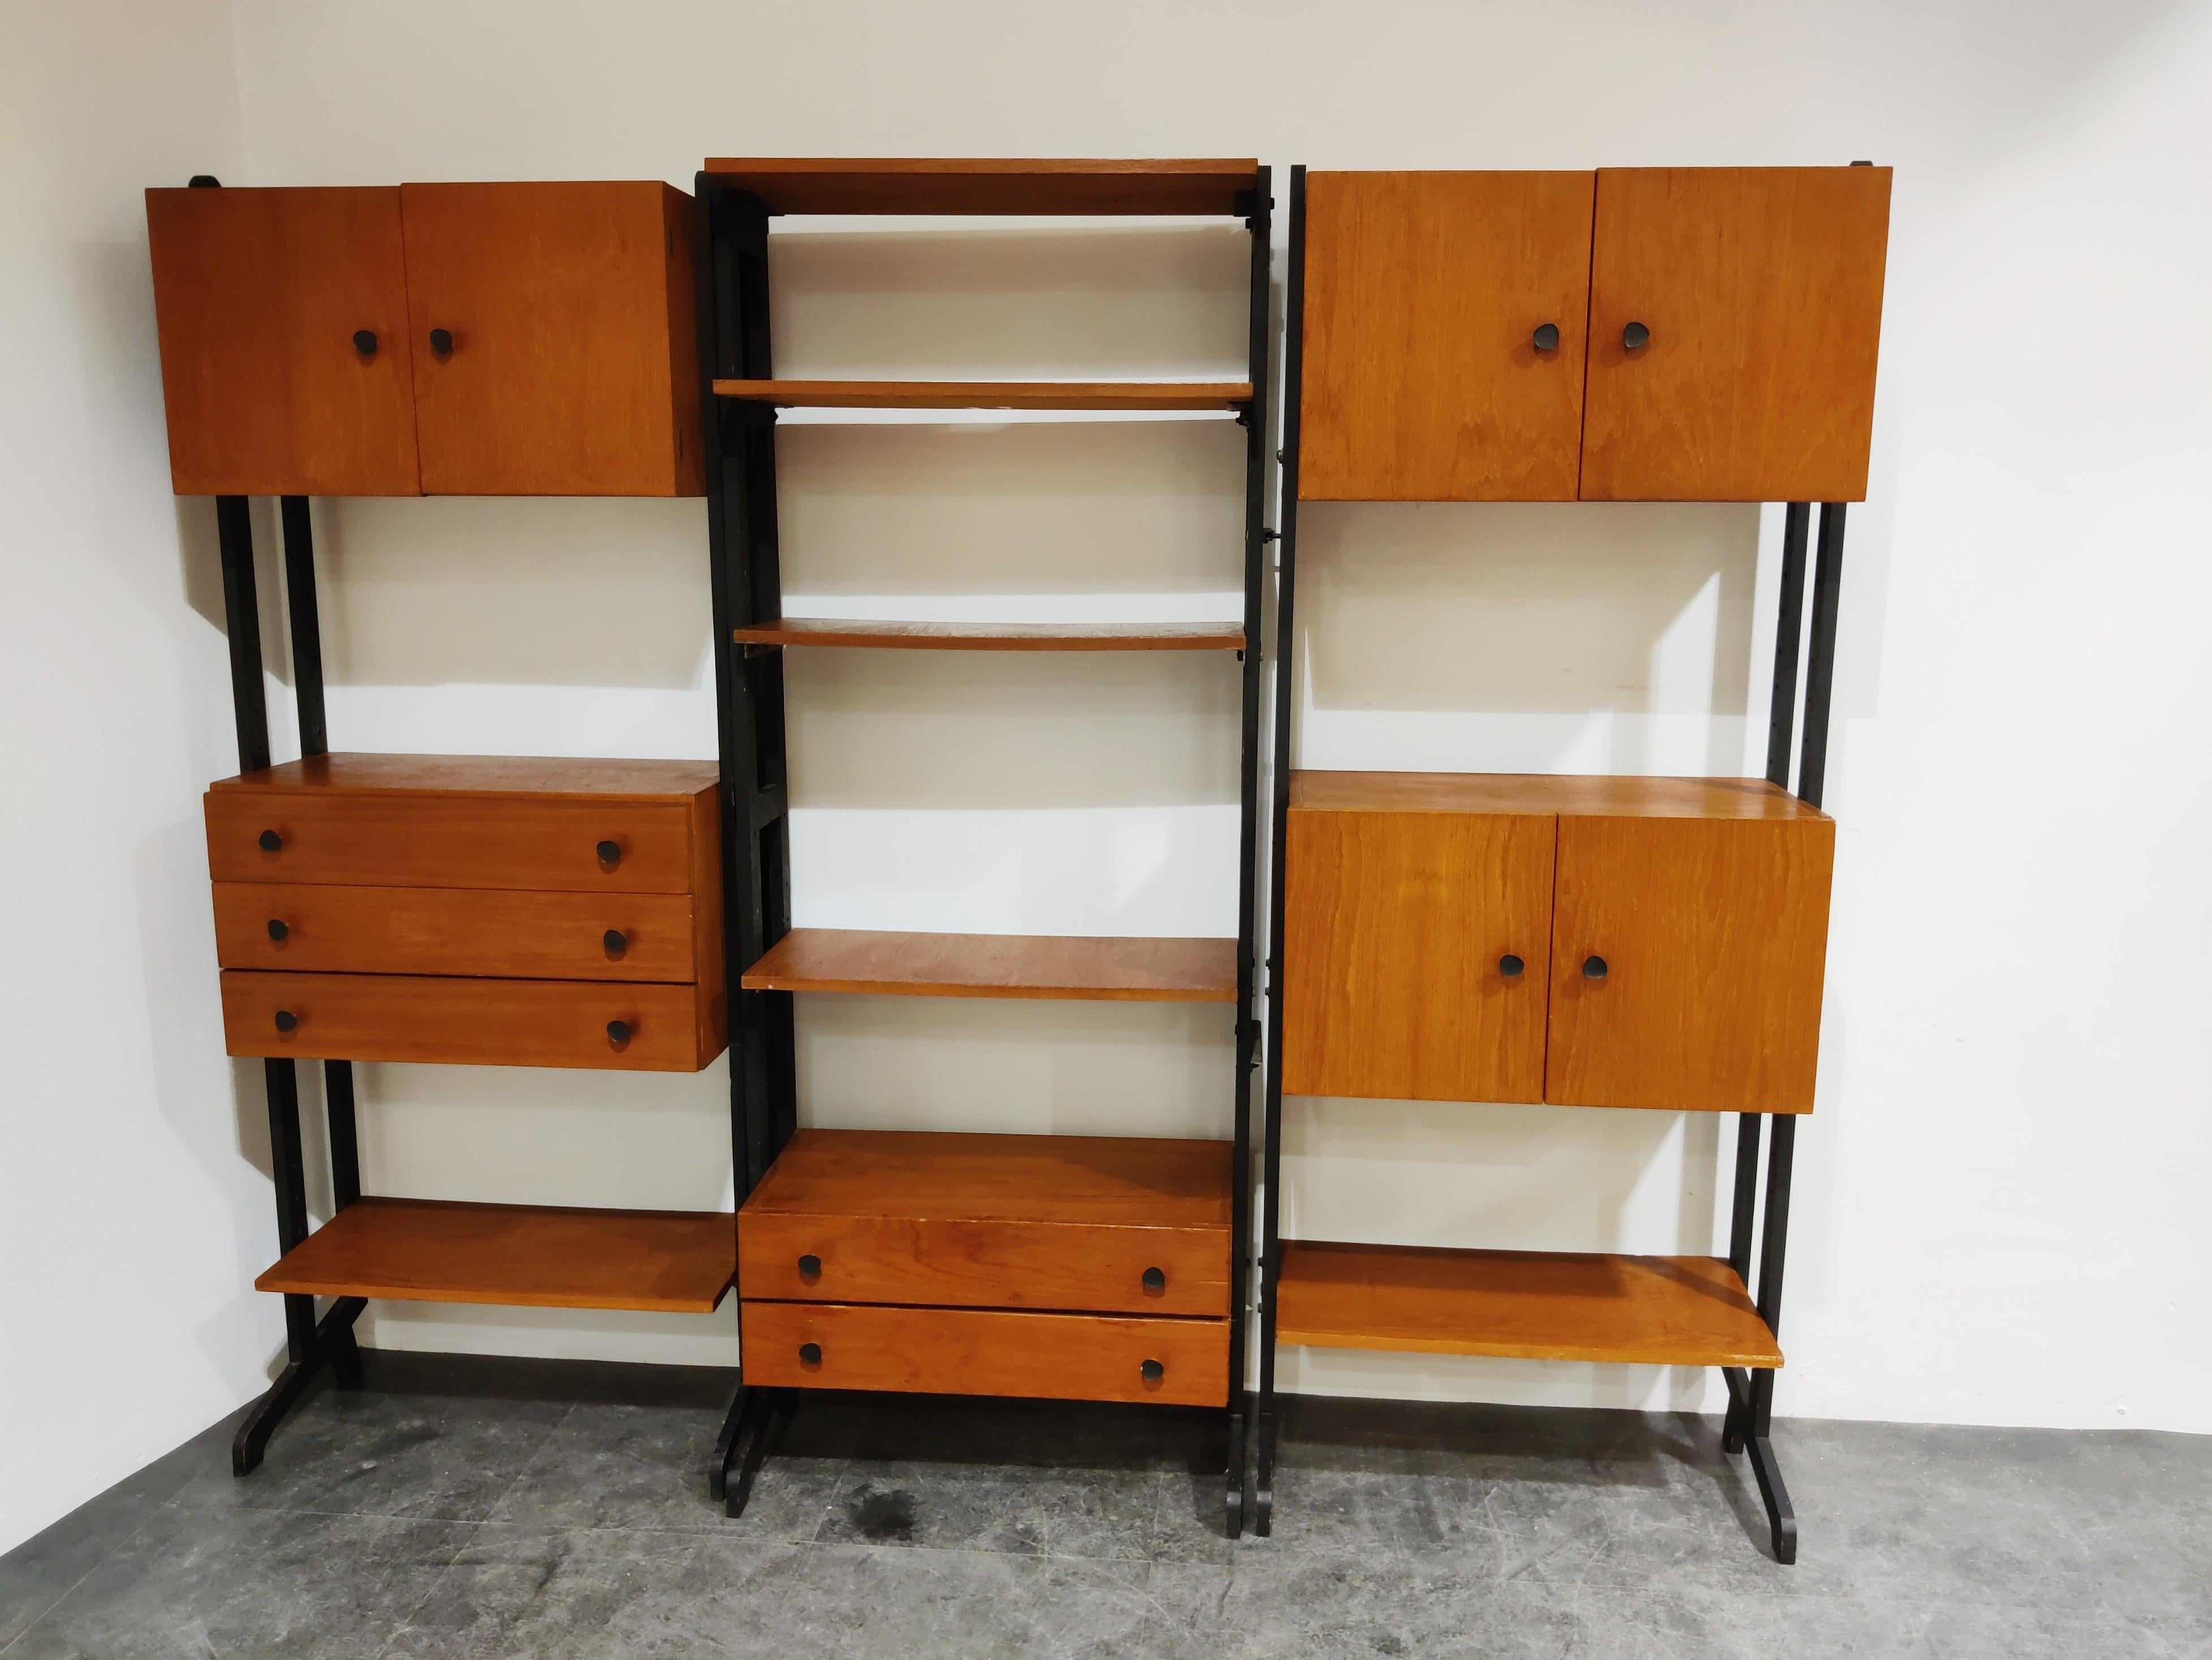 Vintage teak and black painted wooden wall unit manufactured by Simplalux.

Nicely shaped legs and doorhandles.

The wall unit provides enough storage space. Multiple cabinets and chests of drawers and shelves. 

Ideal to display diverse items